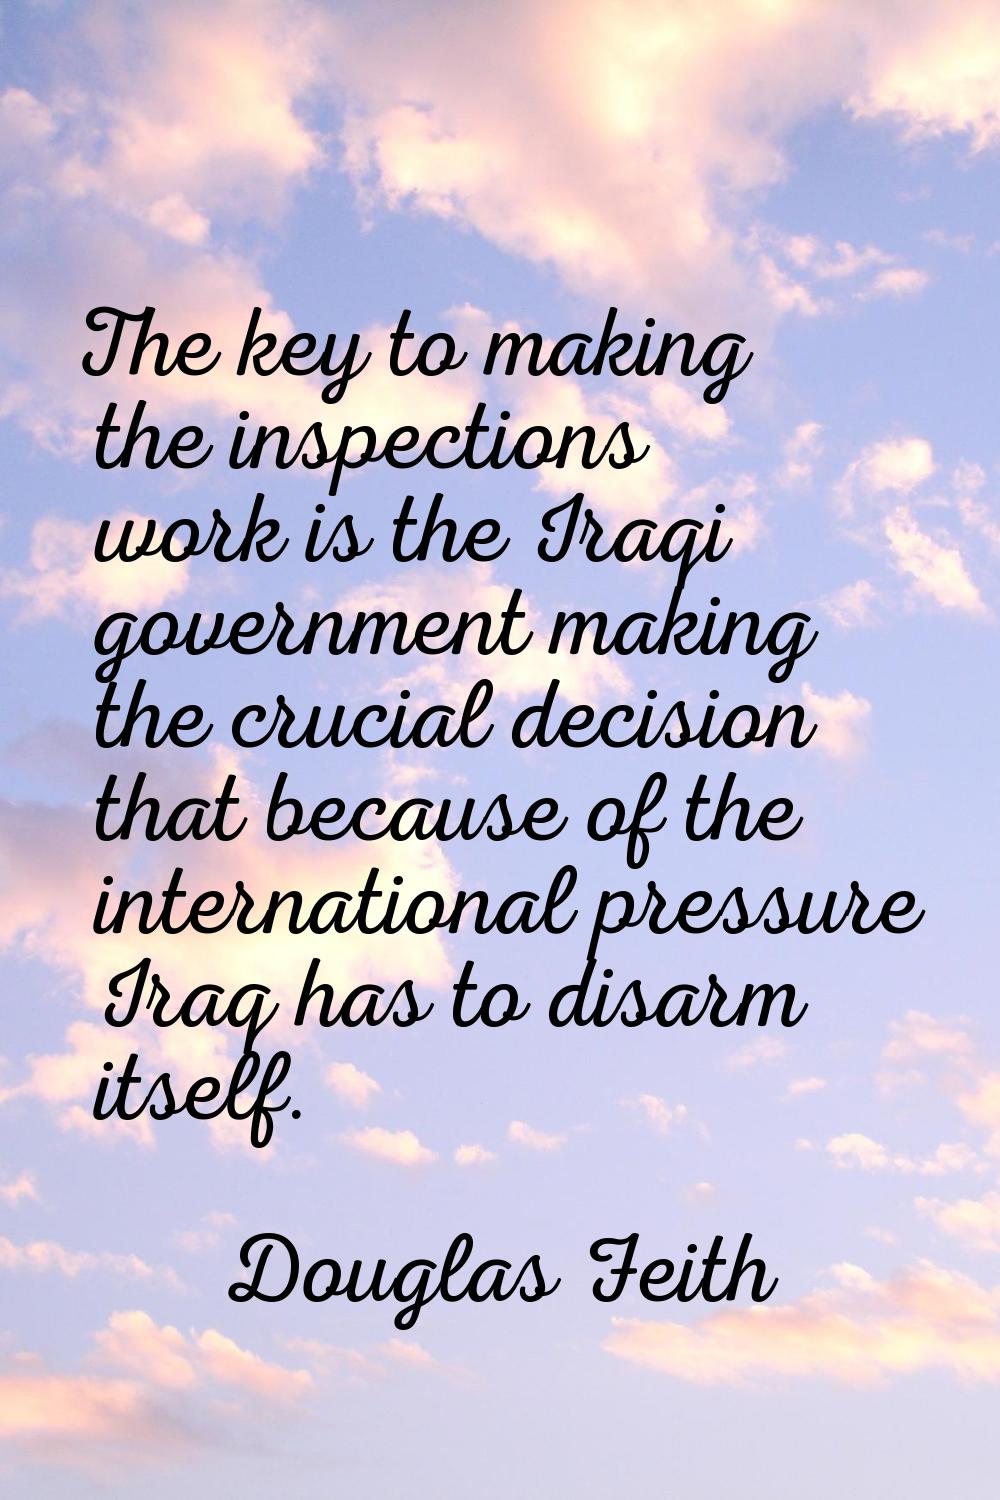 The key to making the inspections work is the Iraqi government making the crucial decision that bec